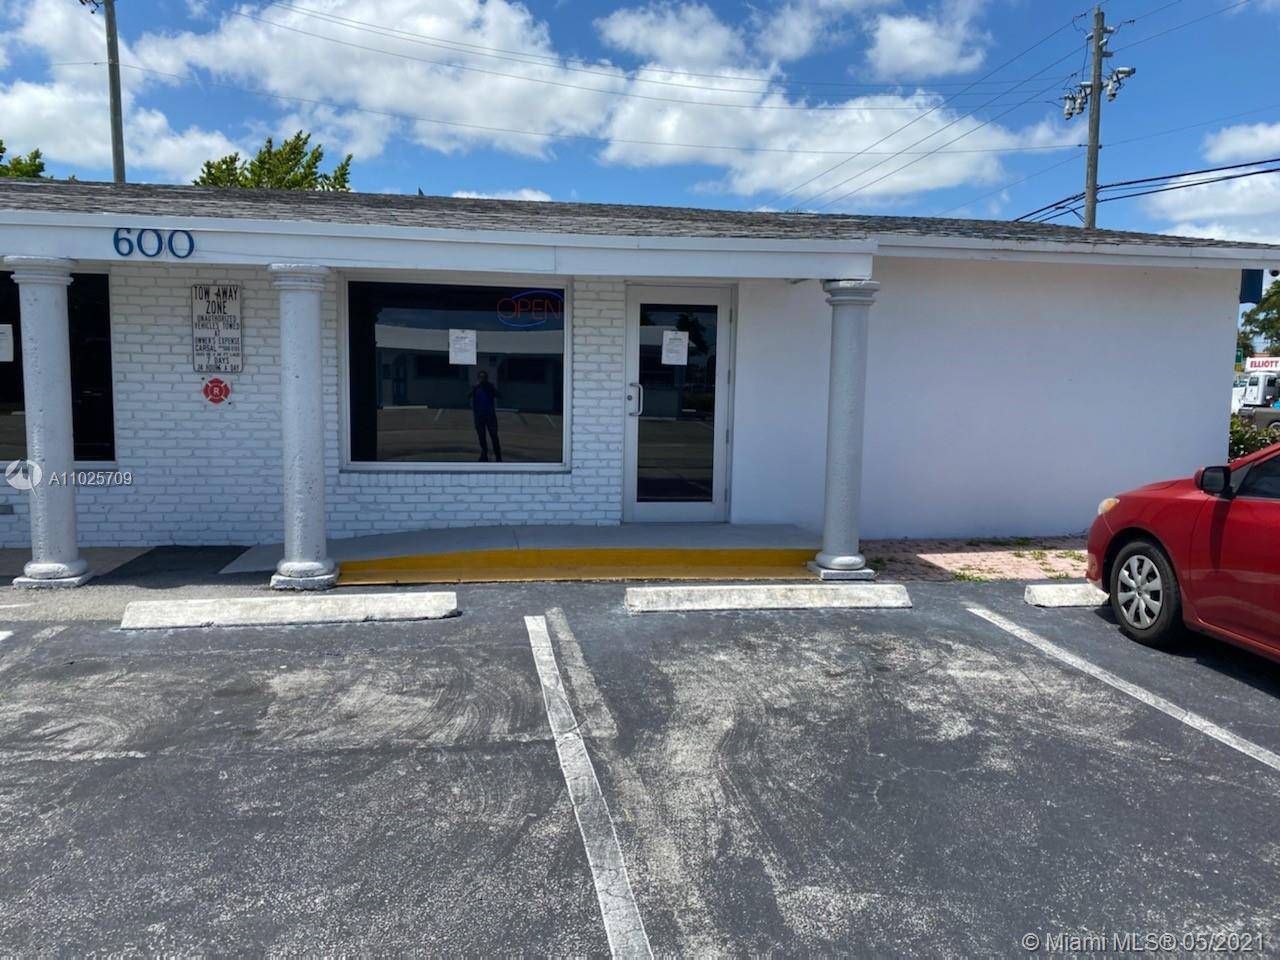 Prime central Broward location just east of I 95.